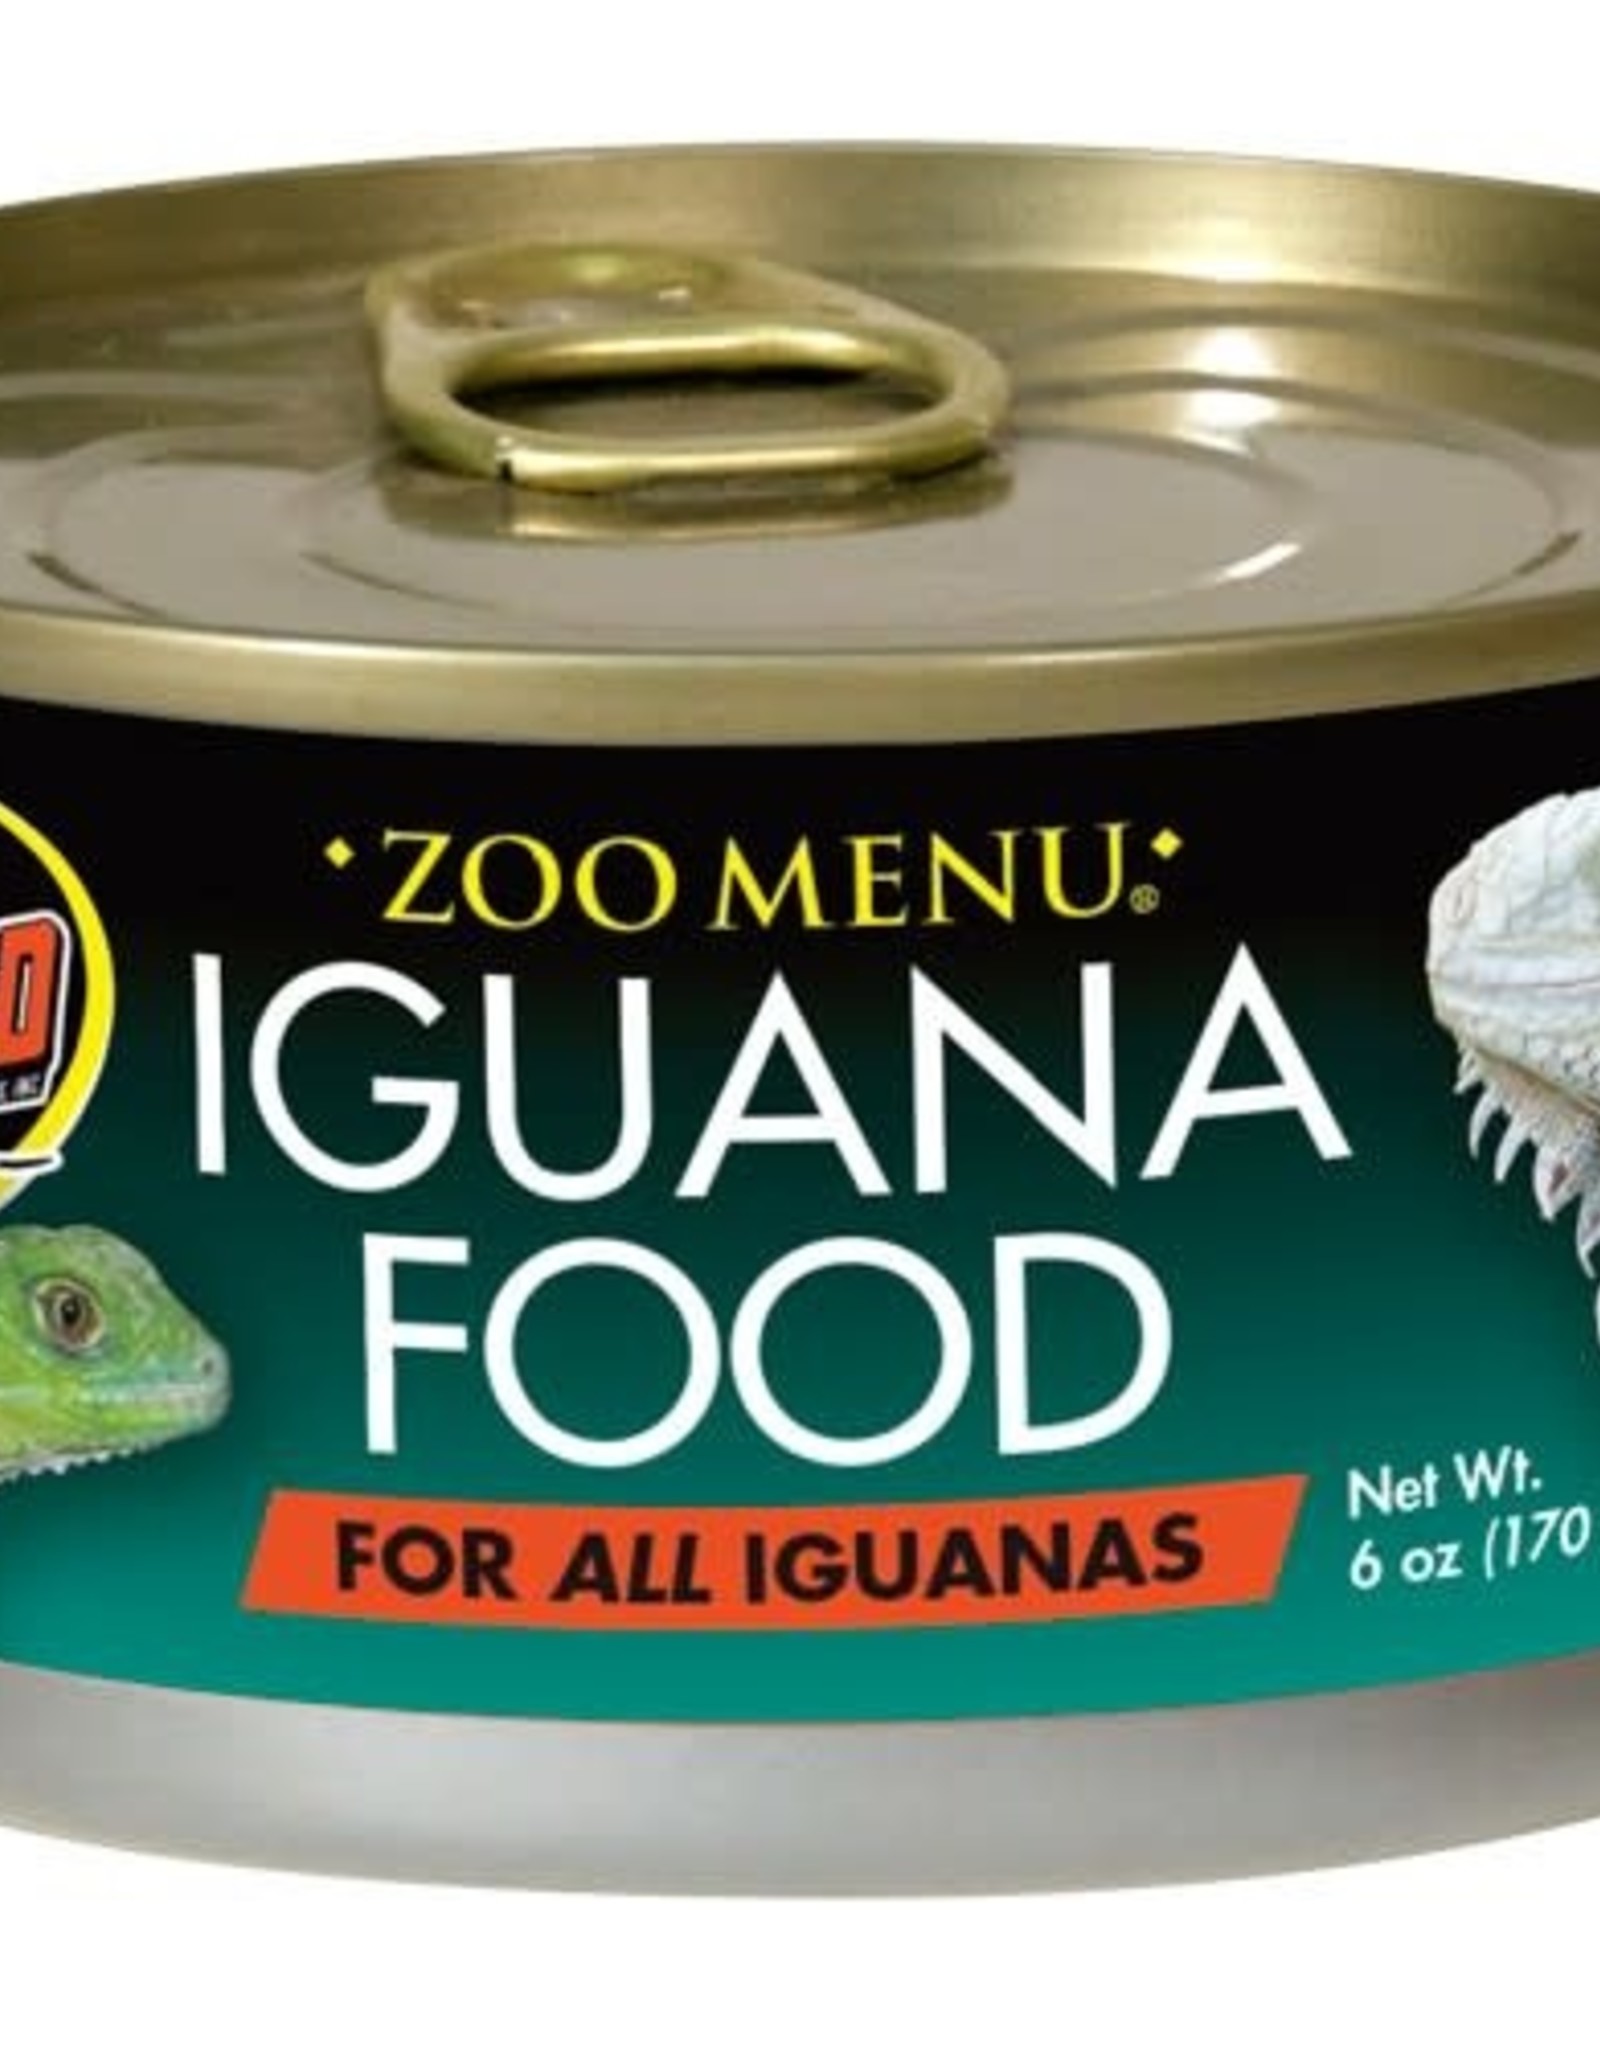 ZOO MED LABORATORIES, INC. ZOO MED ZM-65- CANNED FOOD- FOR ALL IGUANAS- 6 OZ